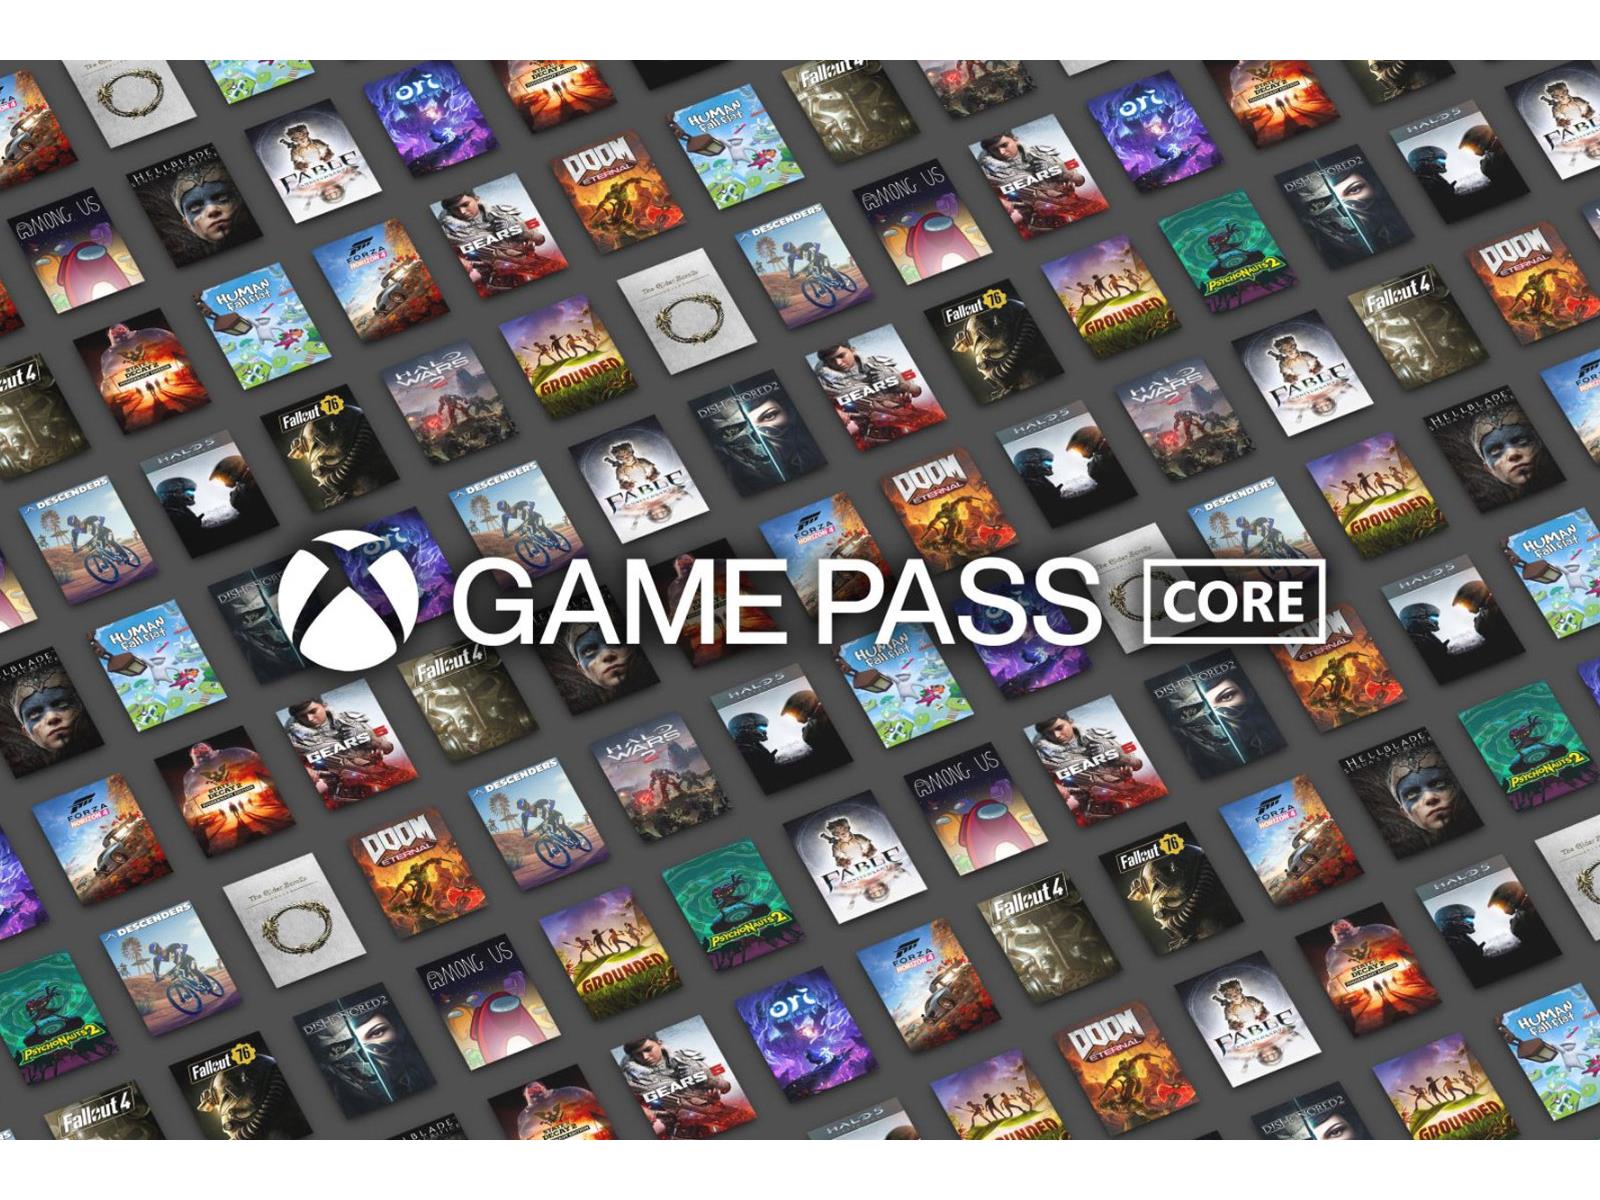 Xbox Game Pass Core Price, Tiers, and How to Change…